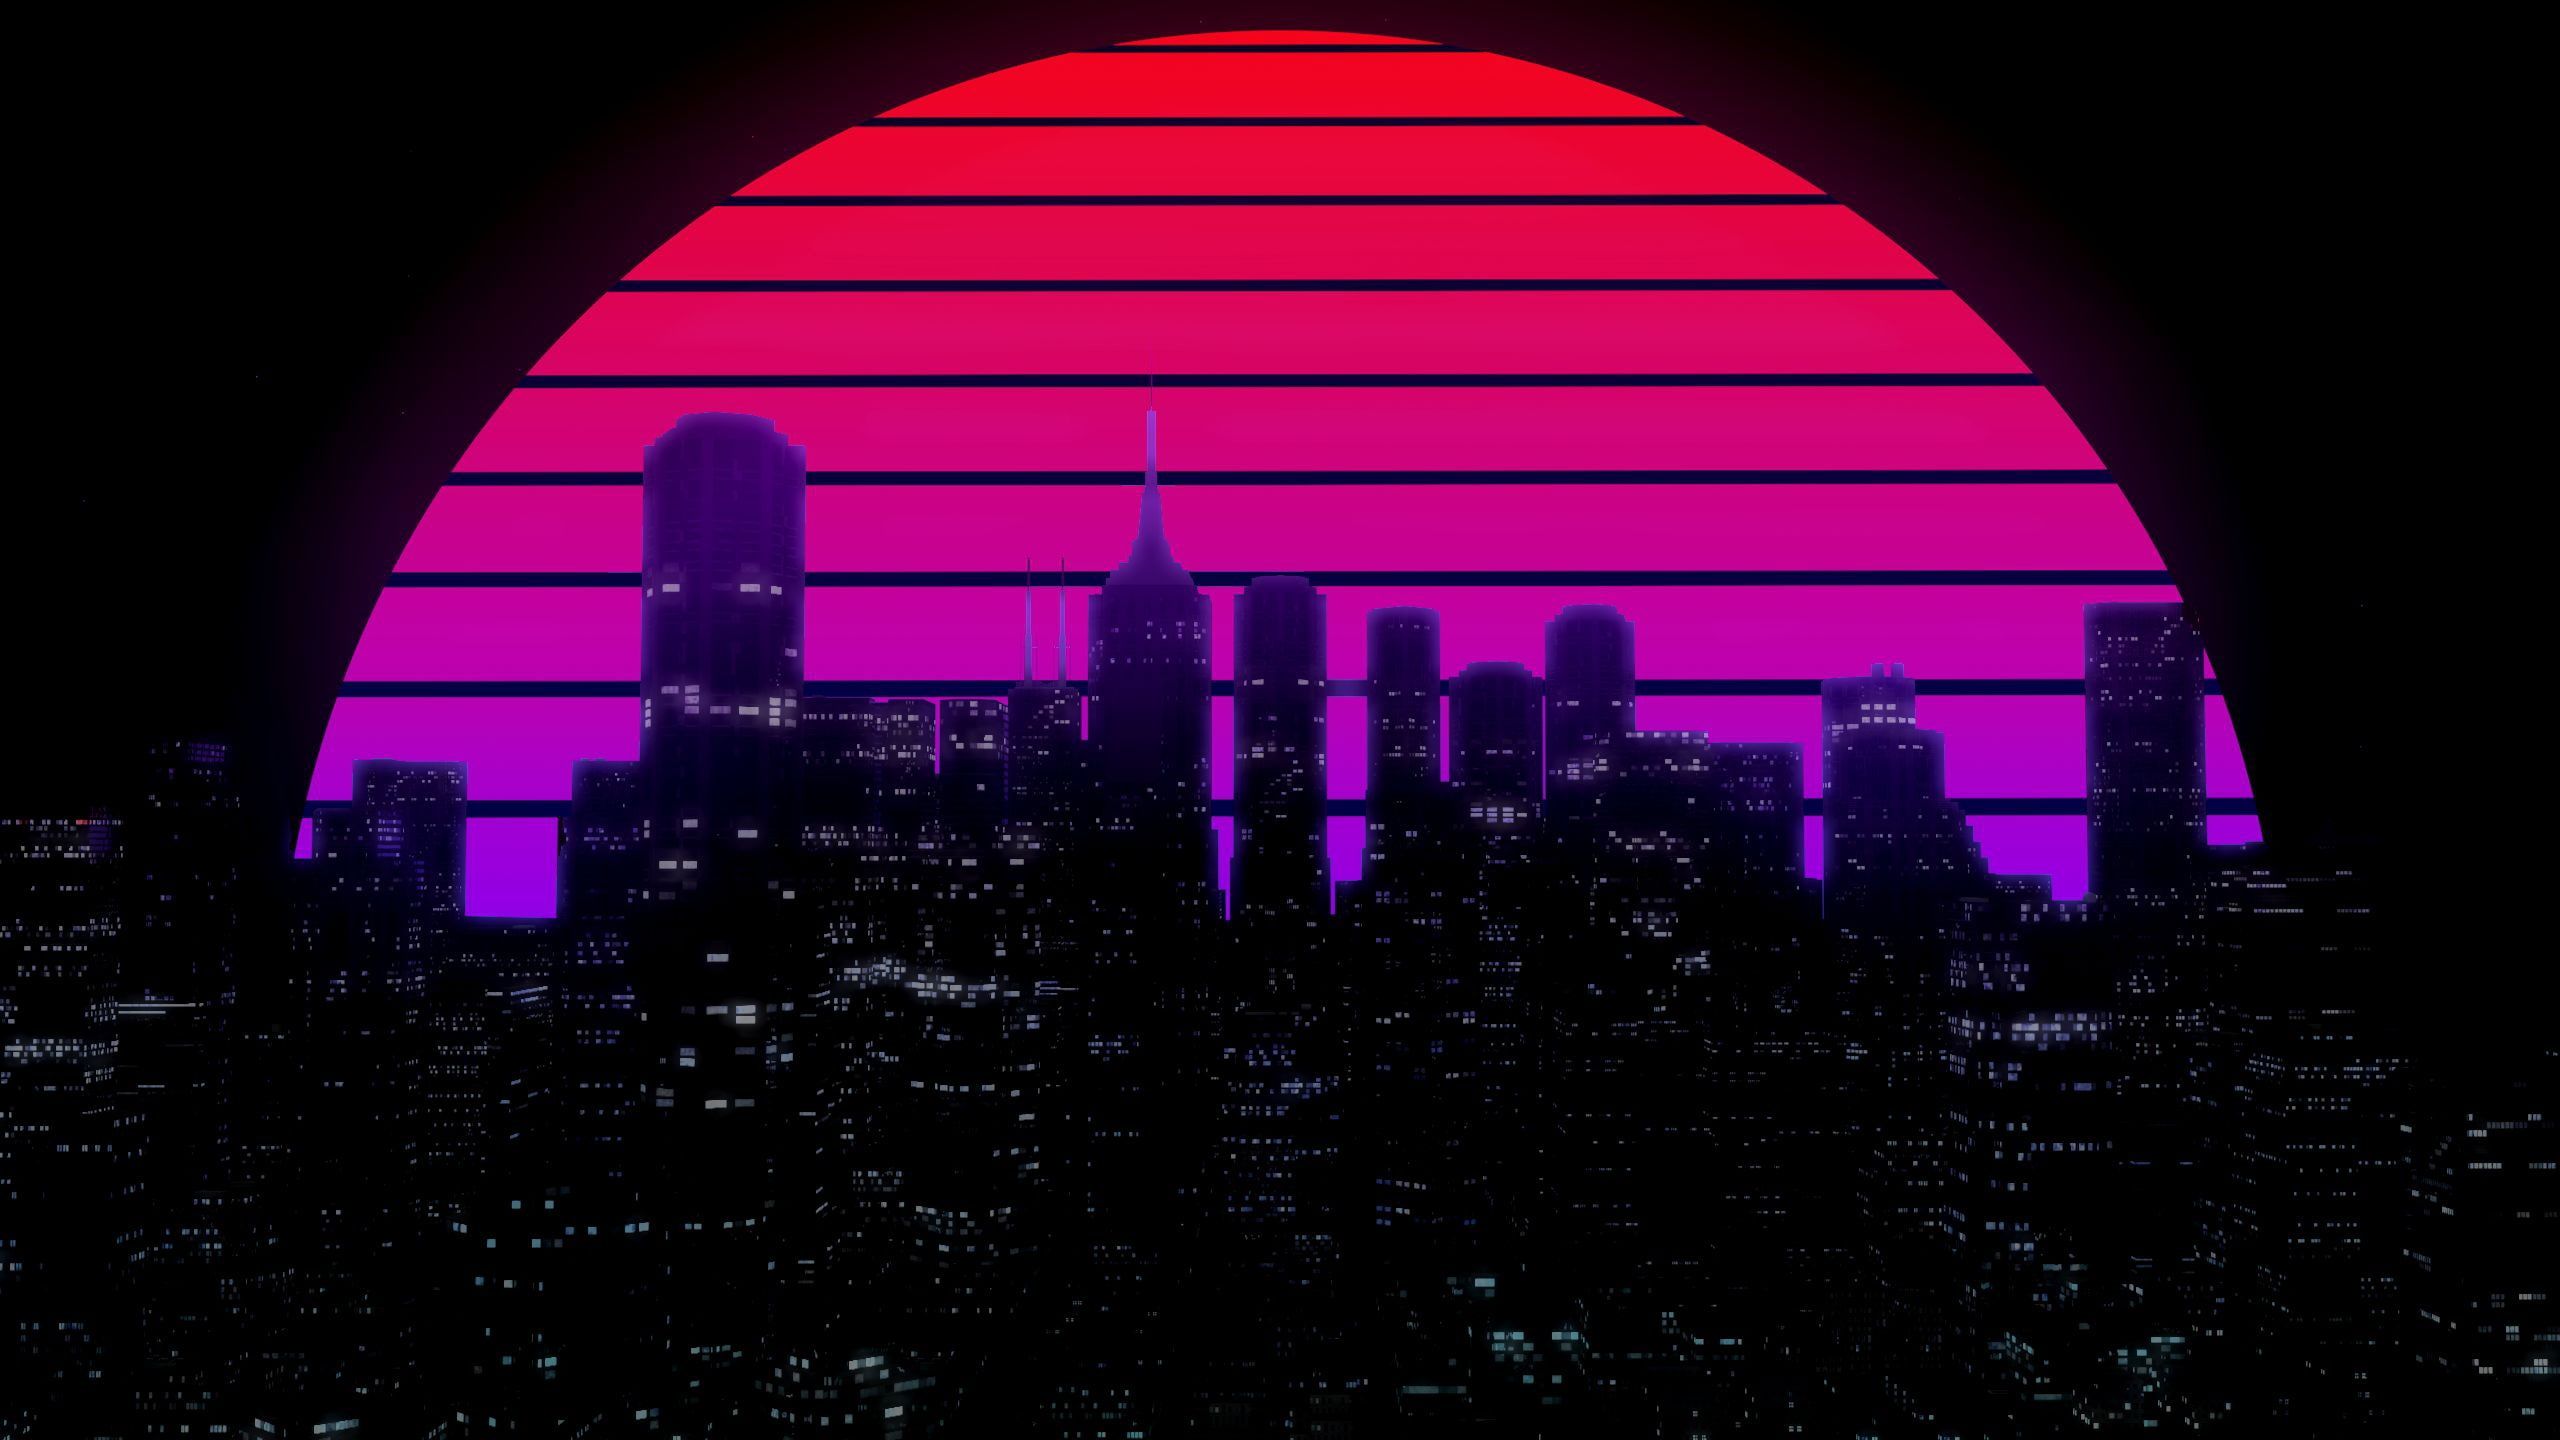 The sun #Night #Music The city #Star #Building #Background s #Neon 's #Synth #Retrow. Aesthetic wallpaper, Aesthetic desktop wallpaper, Cityscape wallpaper